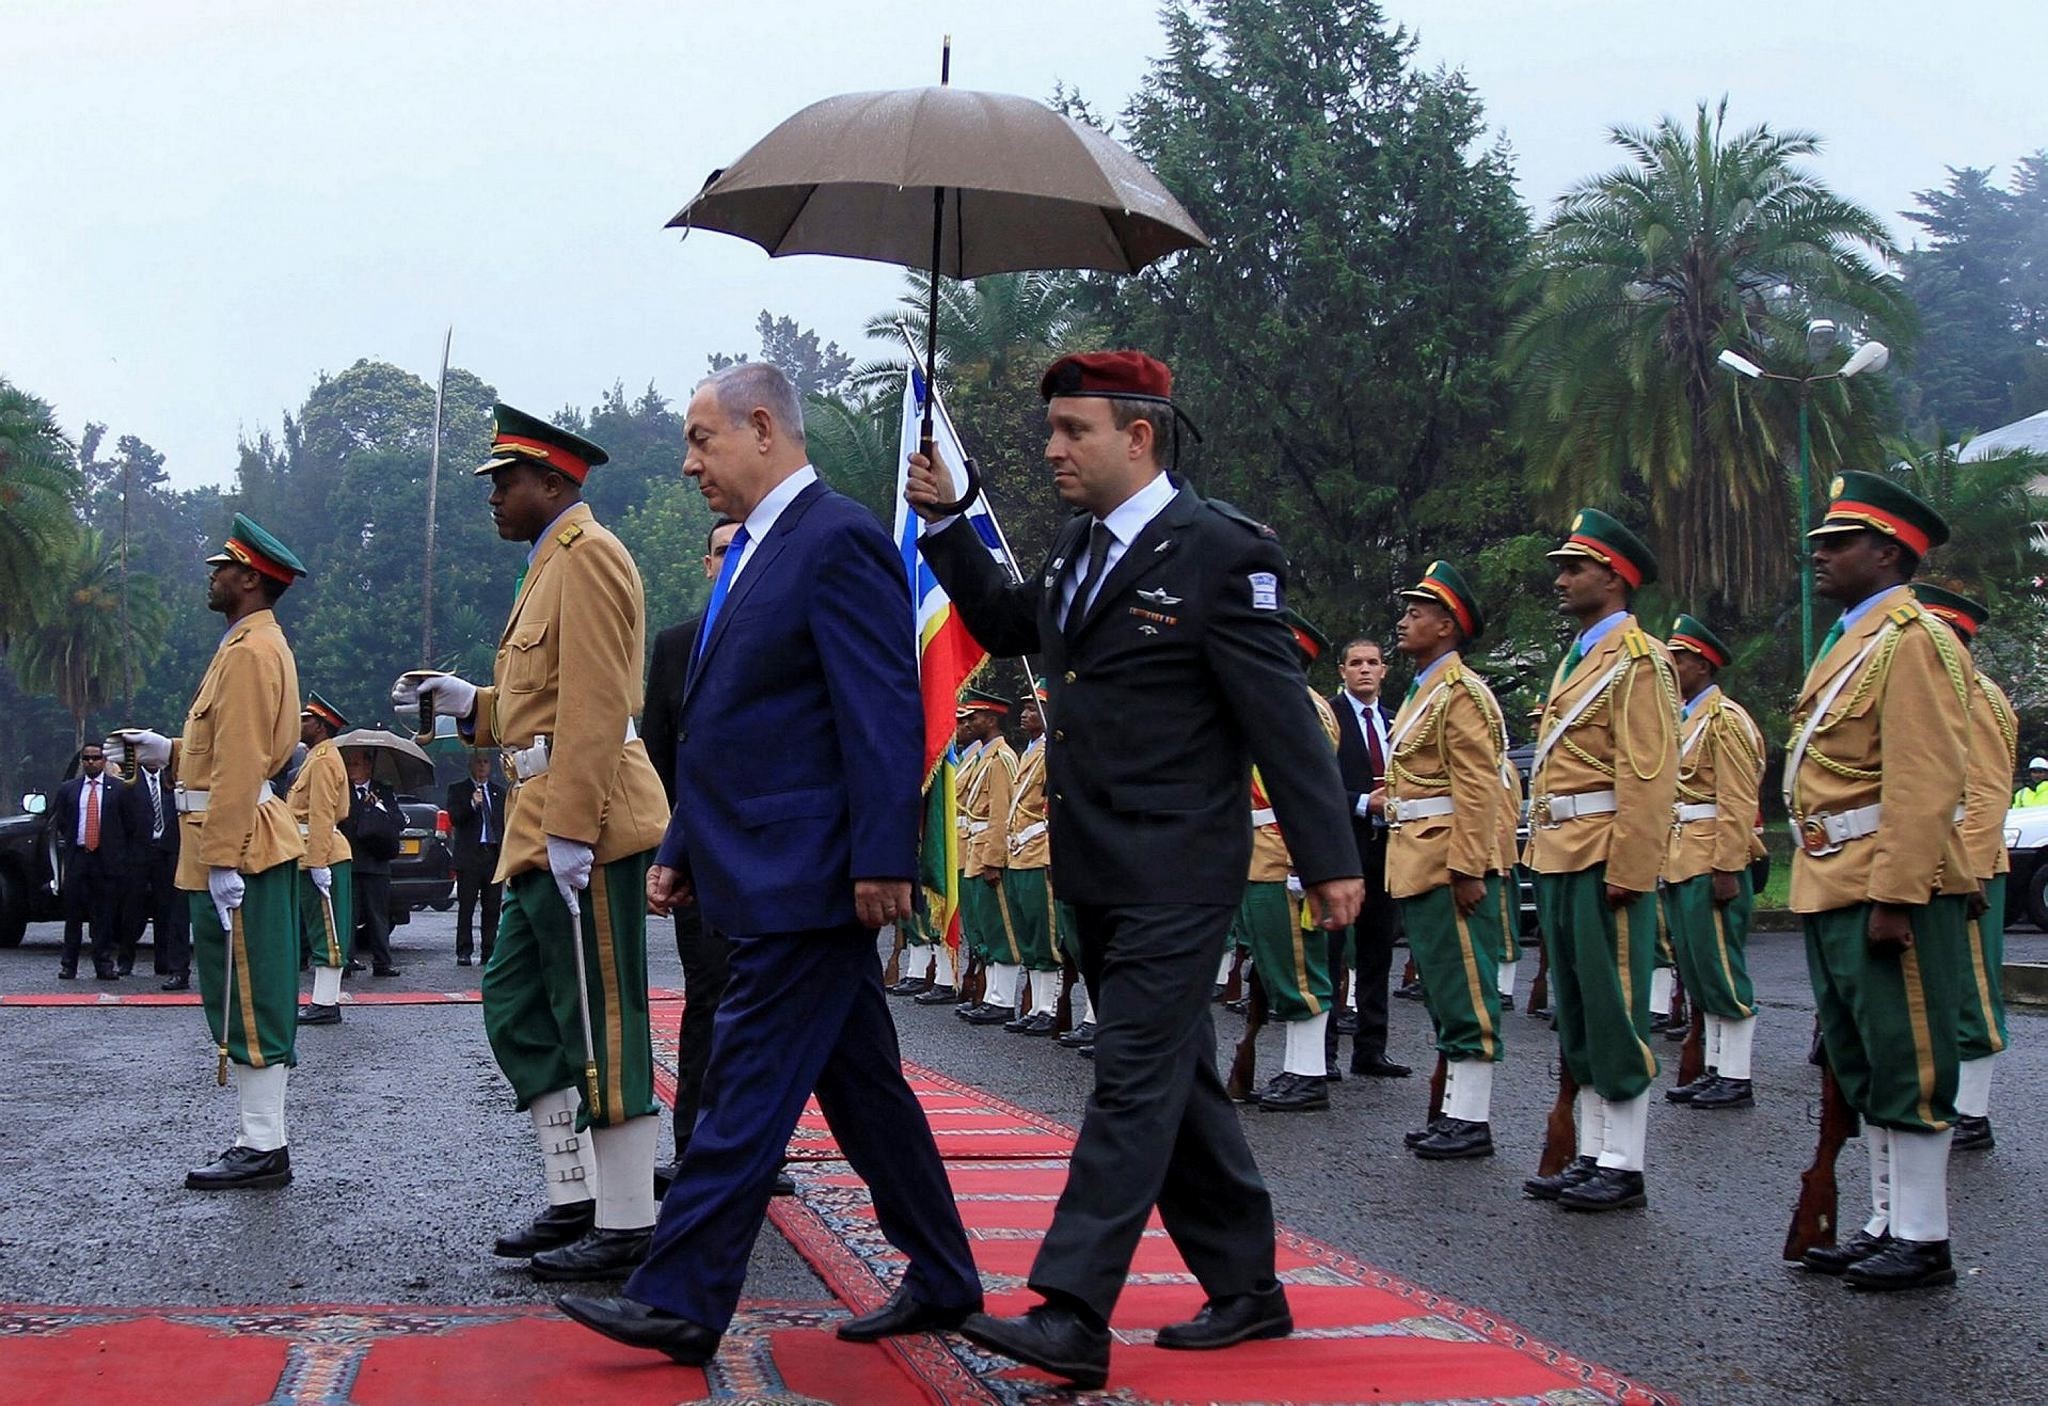 sraeli Prime Minister Benjamin Netanyahu is escorted after inspecting a guard of honor at the National Palace during his State visit to Addis Ababa, Ethiopia, July 7, 2016. (REUTERS Photo)